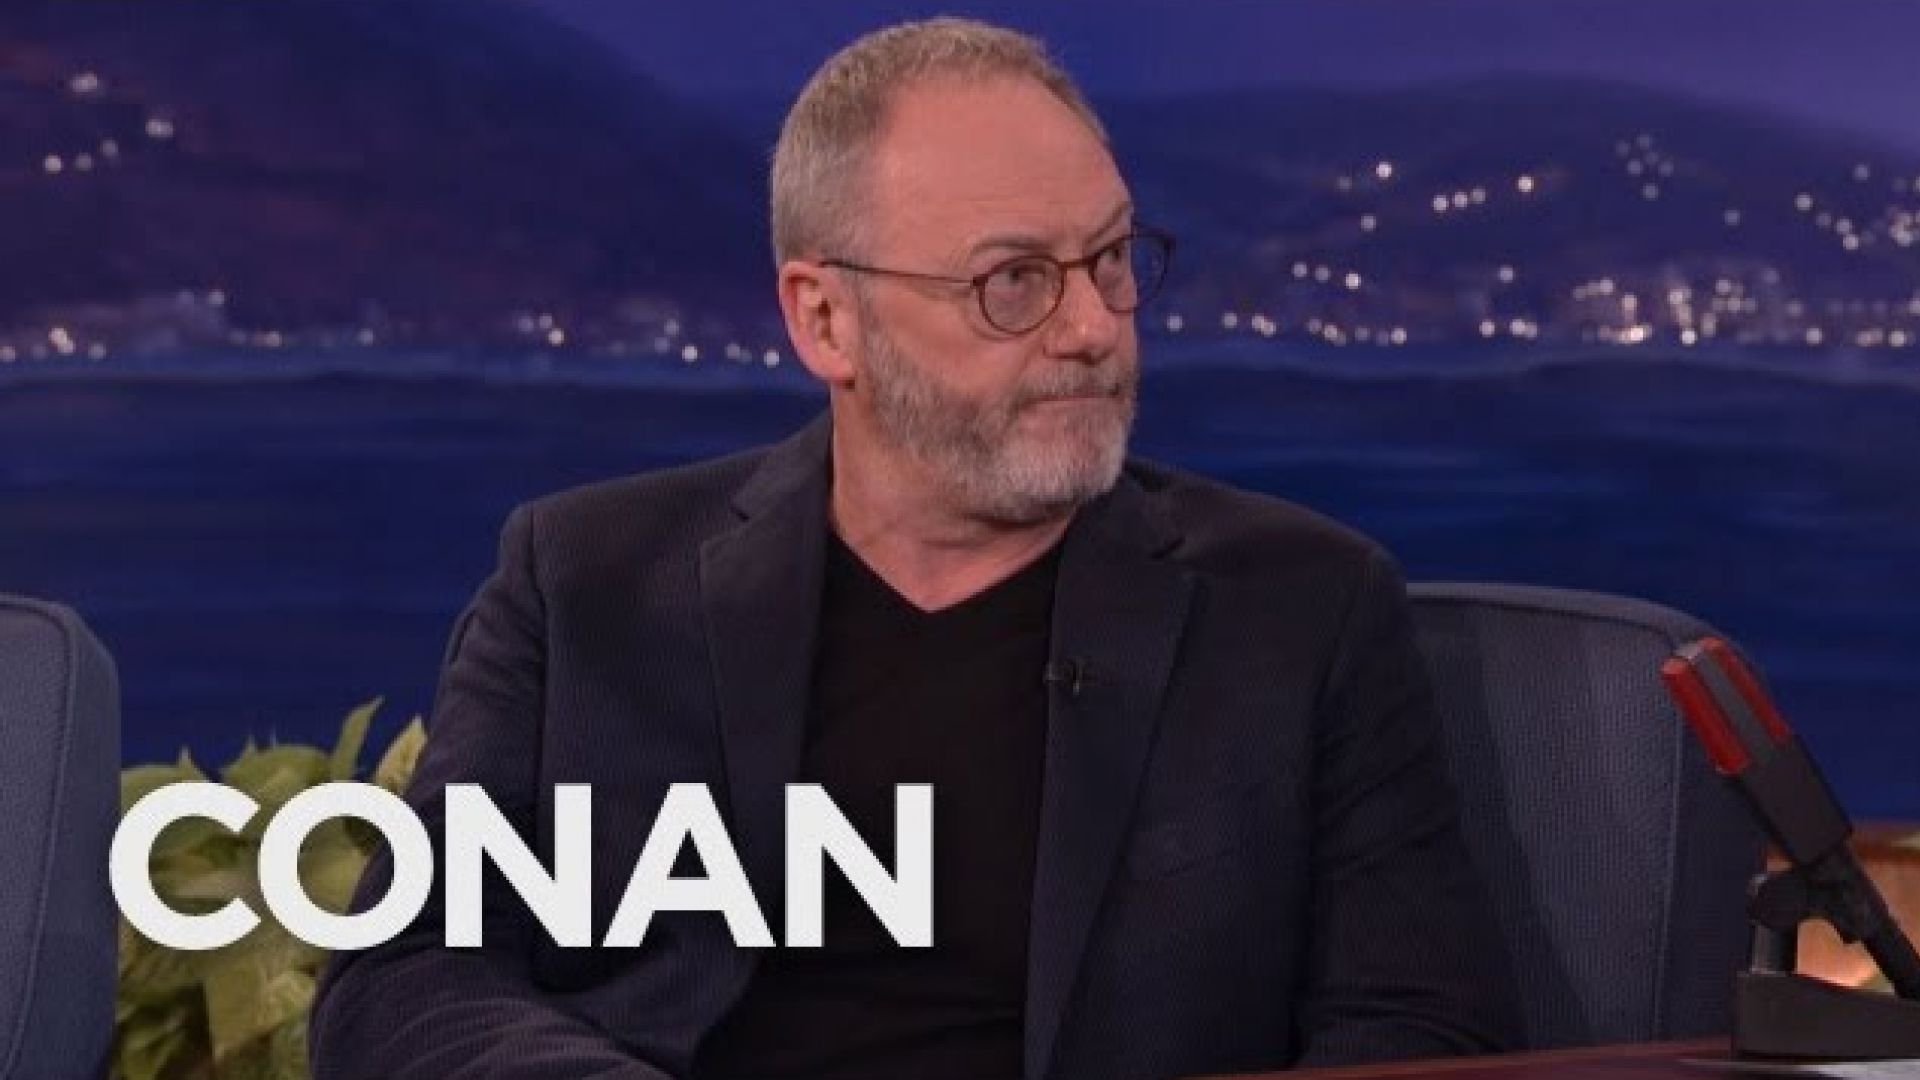 Hilarious interview between Liam Cunningham and Conan ends w